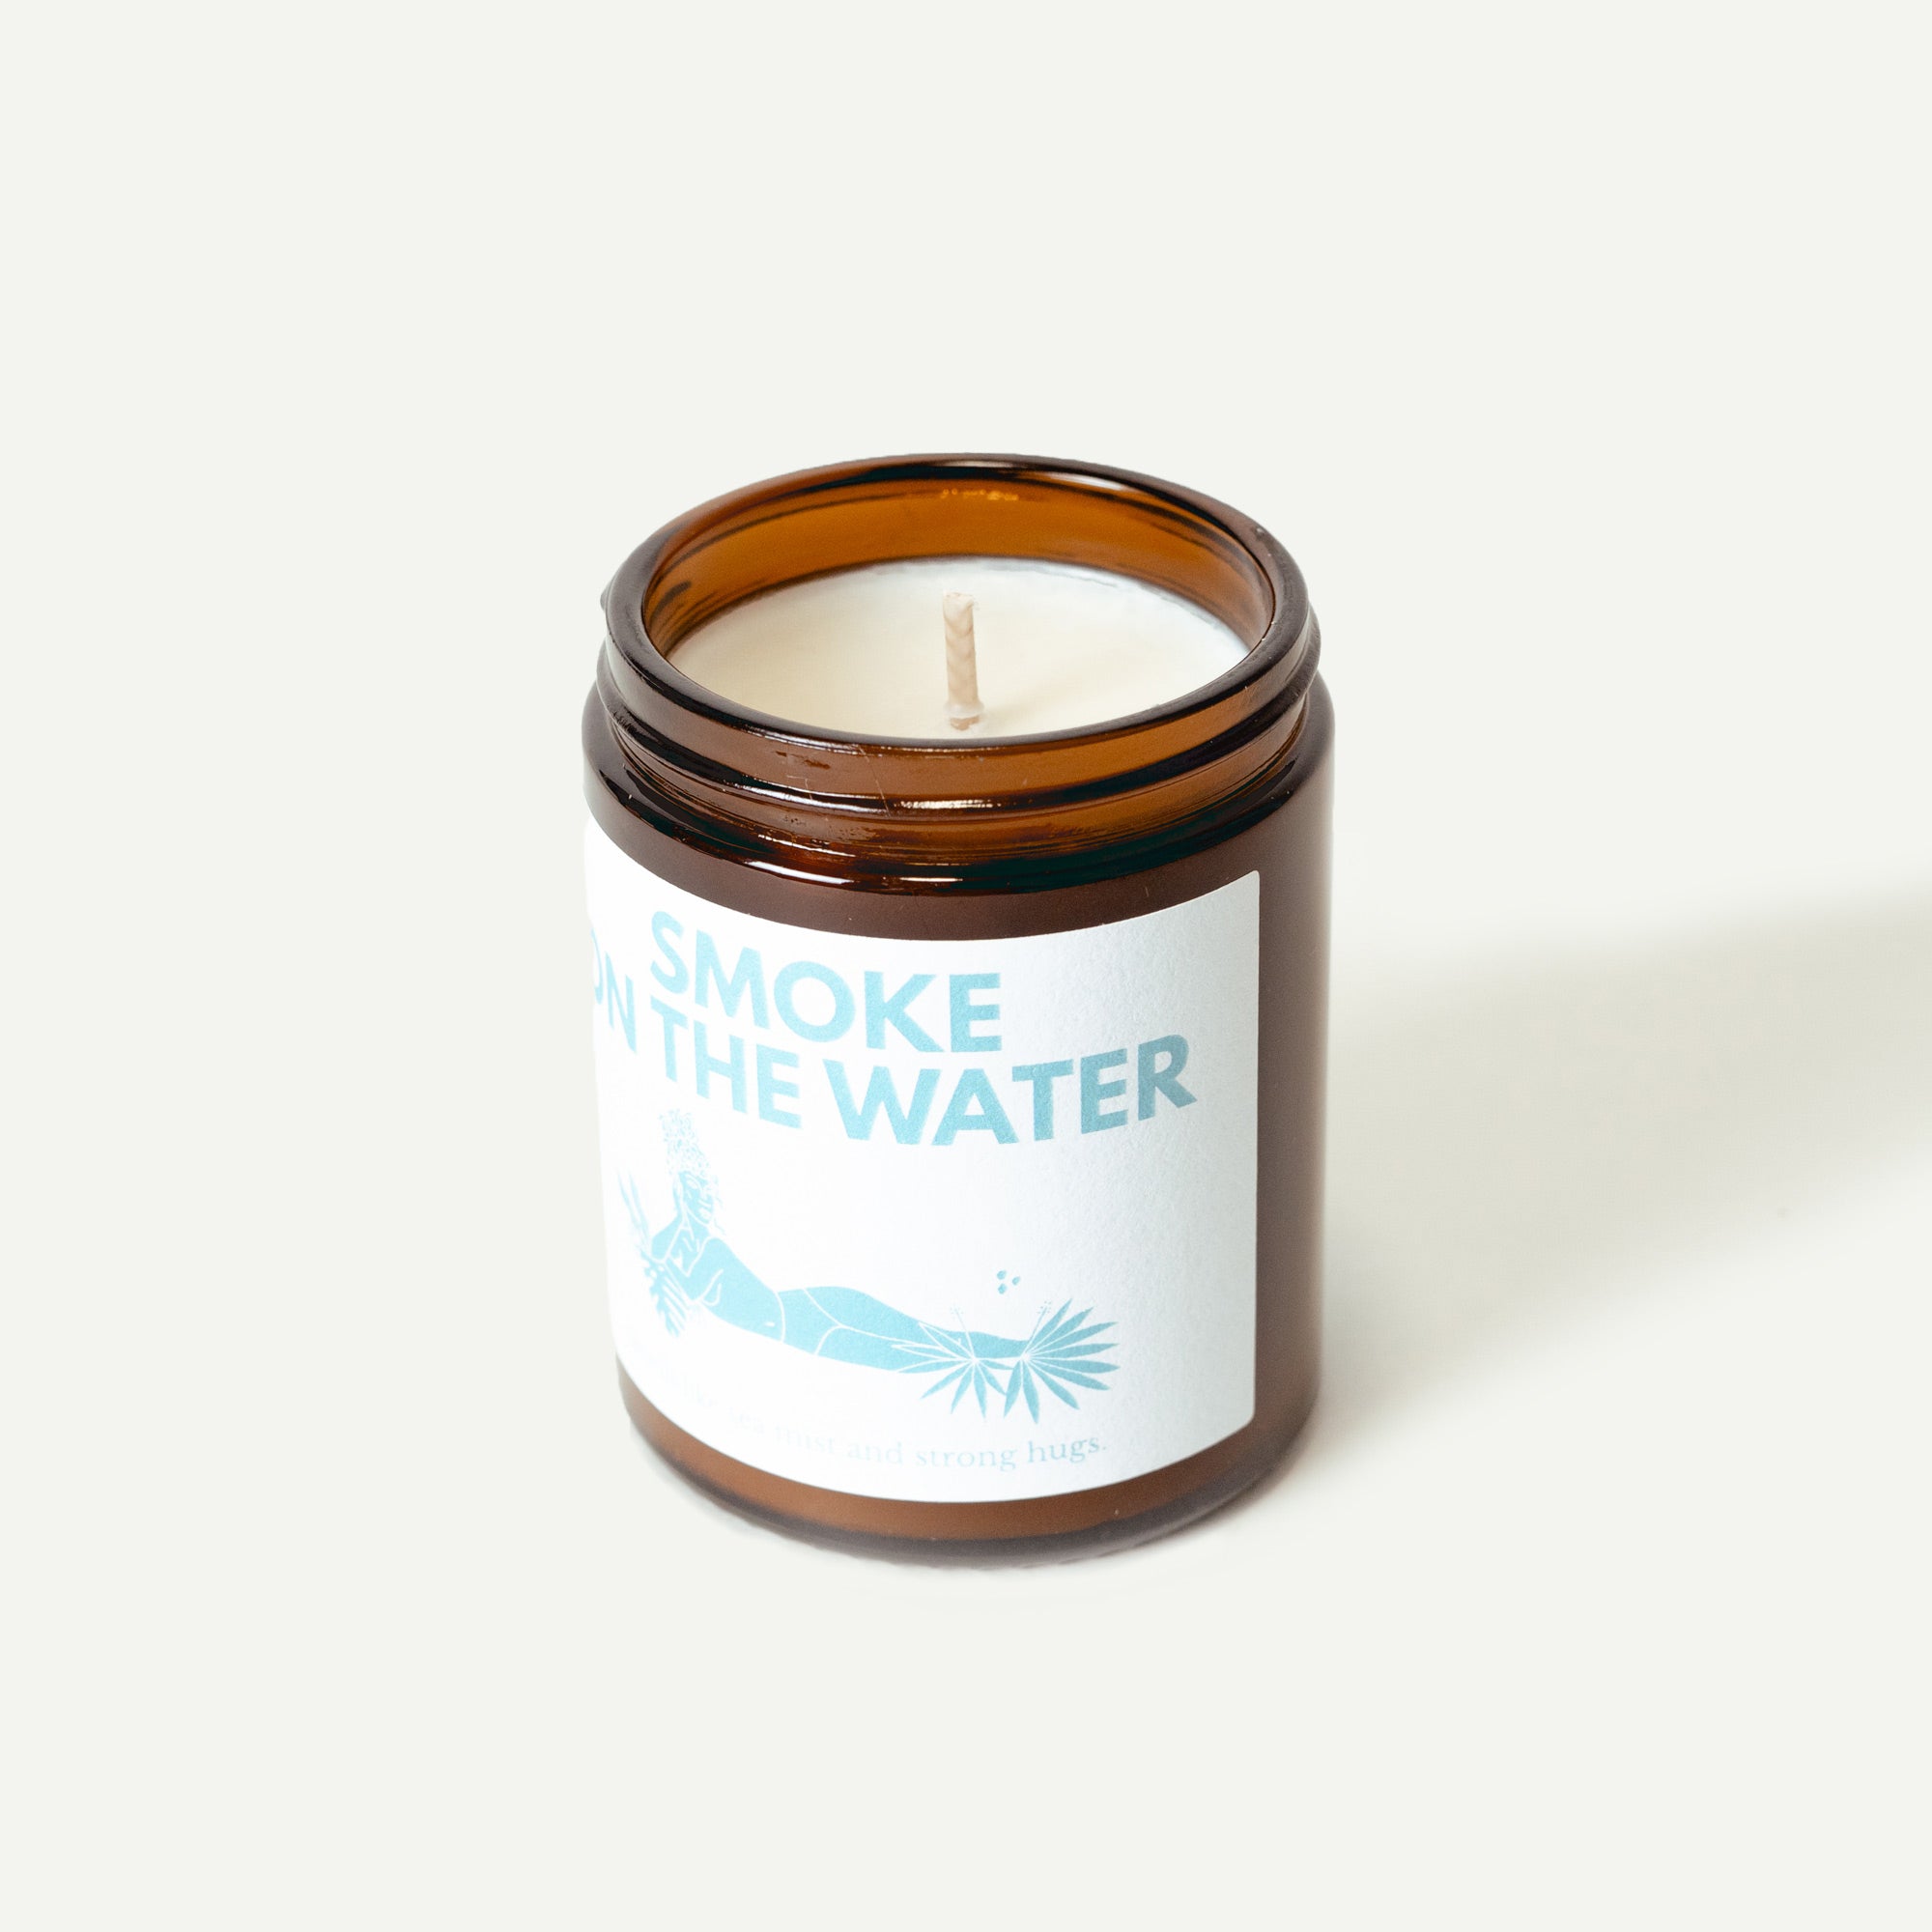 Les Boujies Smoke on the Water Soy Wax Candle